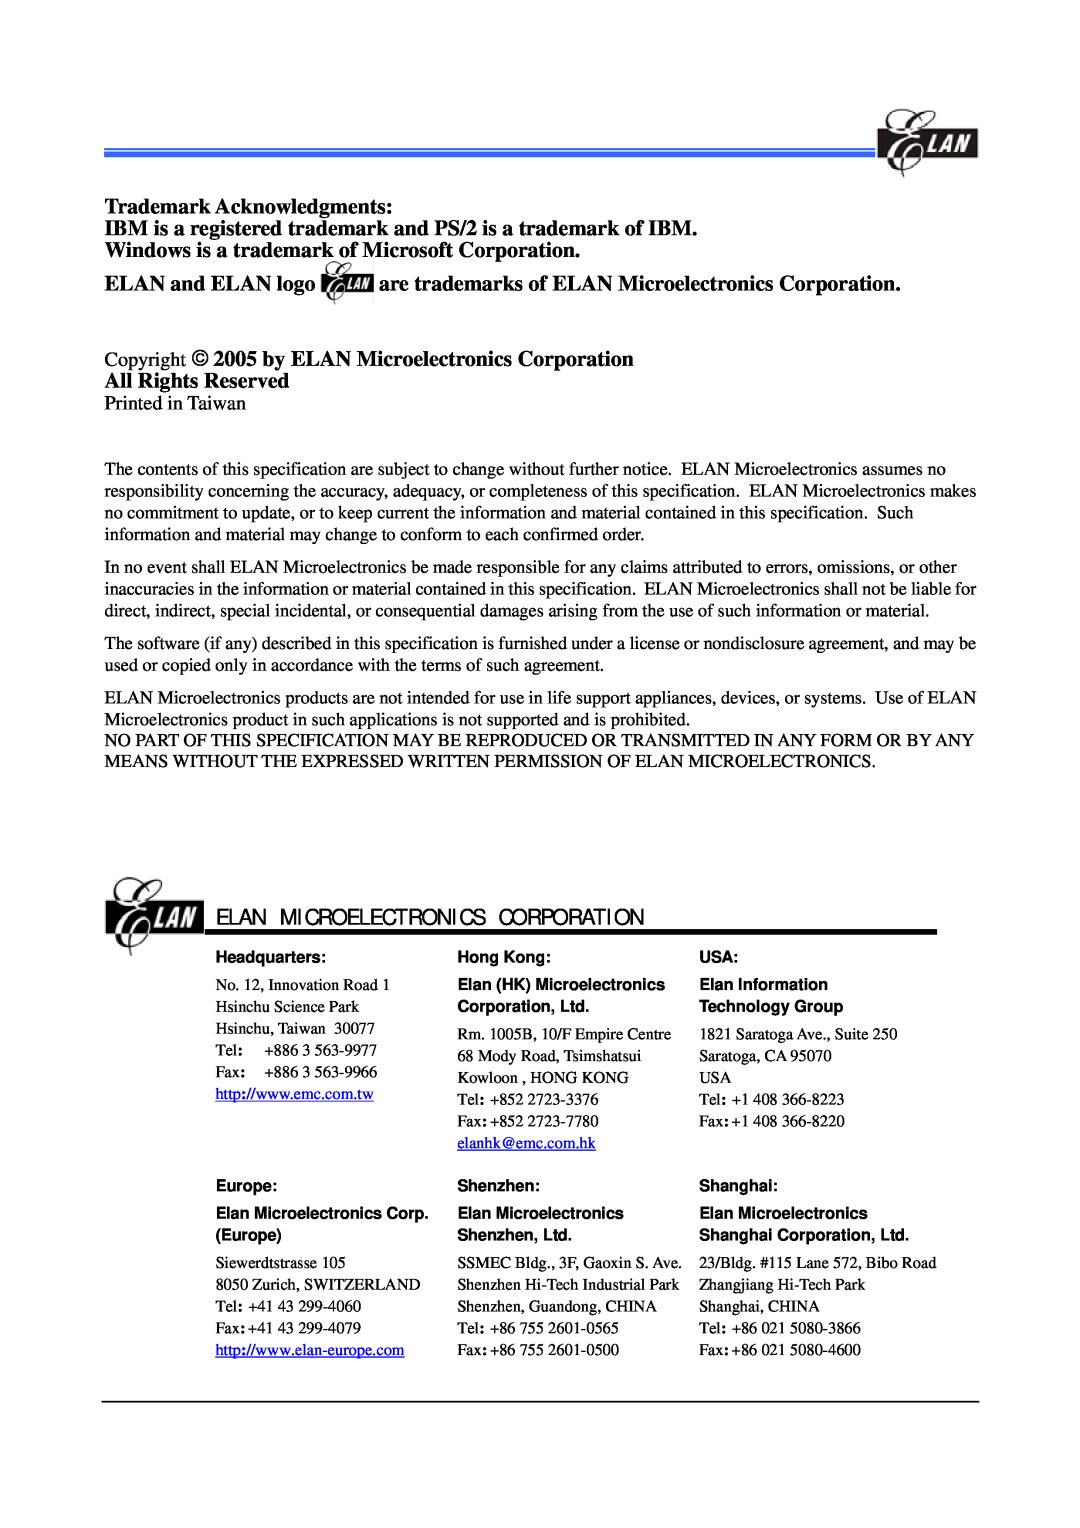 IBM EM78P447N manual Trademark Acknowledgments, Copyright 2005 by ELAN Microelectronics Corporation, All Rights Reserved 